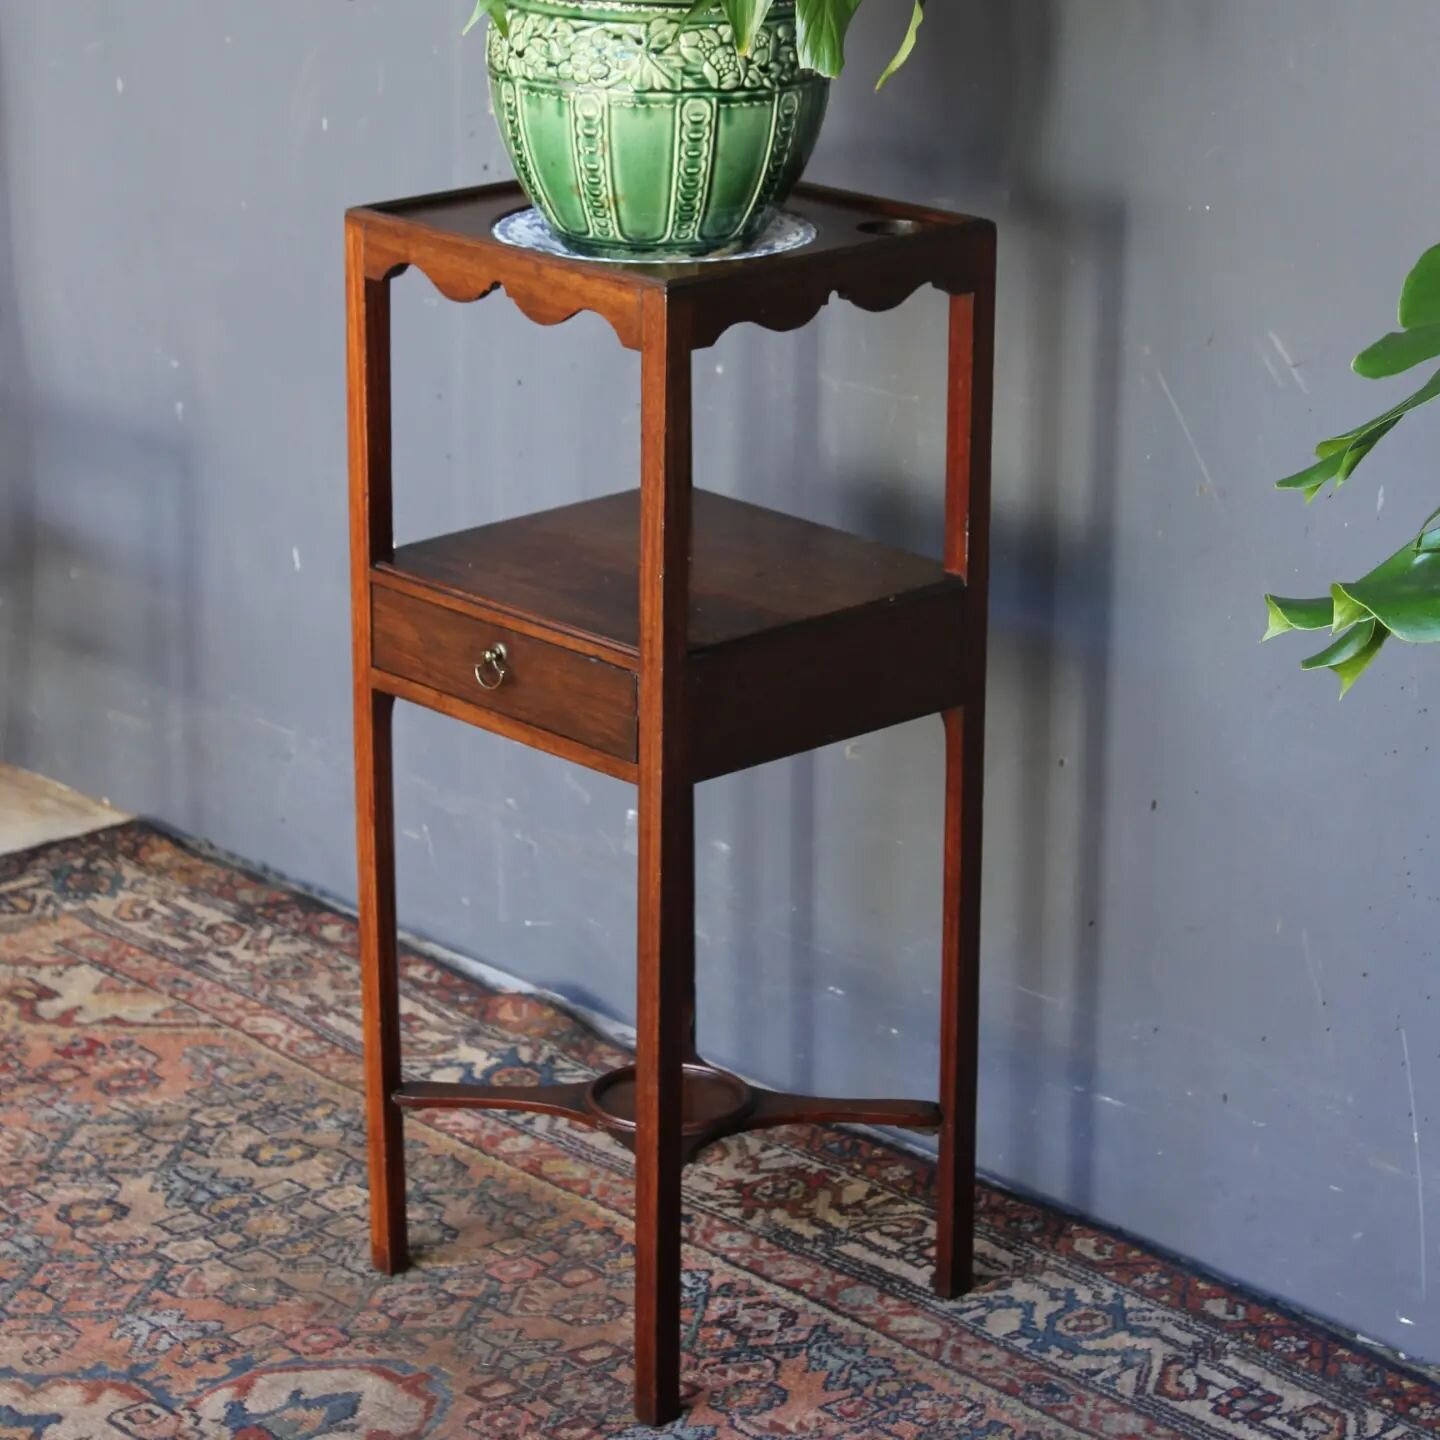 Small Edwardian Mahogany wash stand,&nbsp; makes a great plant stand.&nbsp; Centre hole for a wash bowl and two smaller ones for soap &amp; brush holders.&nbsp;
A plate works to support a pot if you used it for a plant stand.&nbsp; A small repair to 